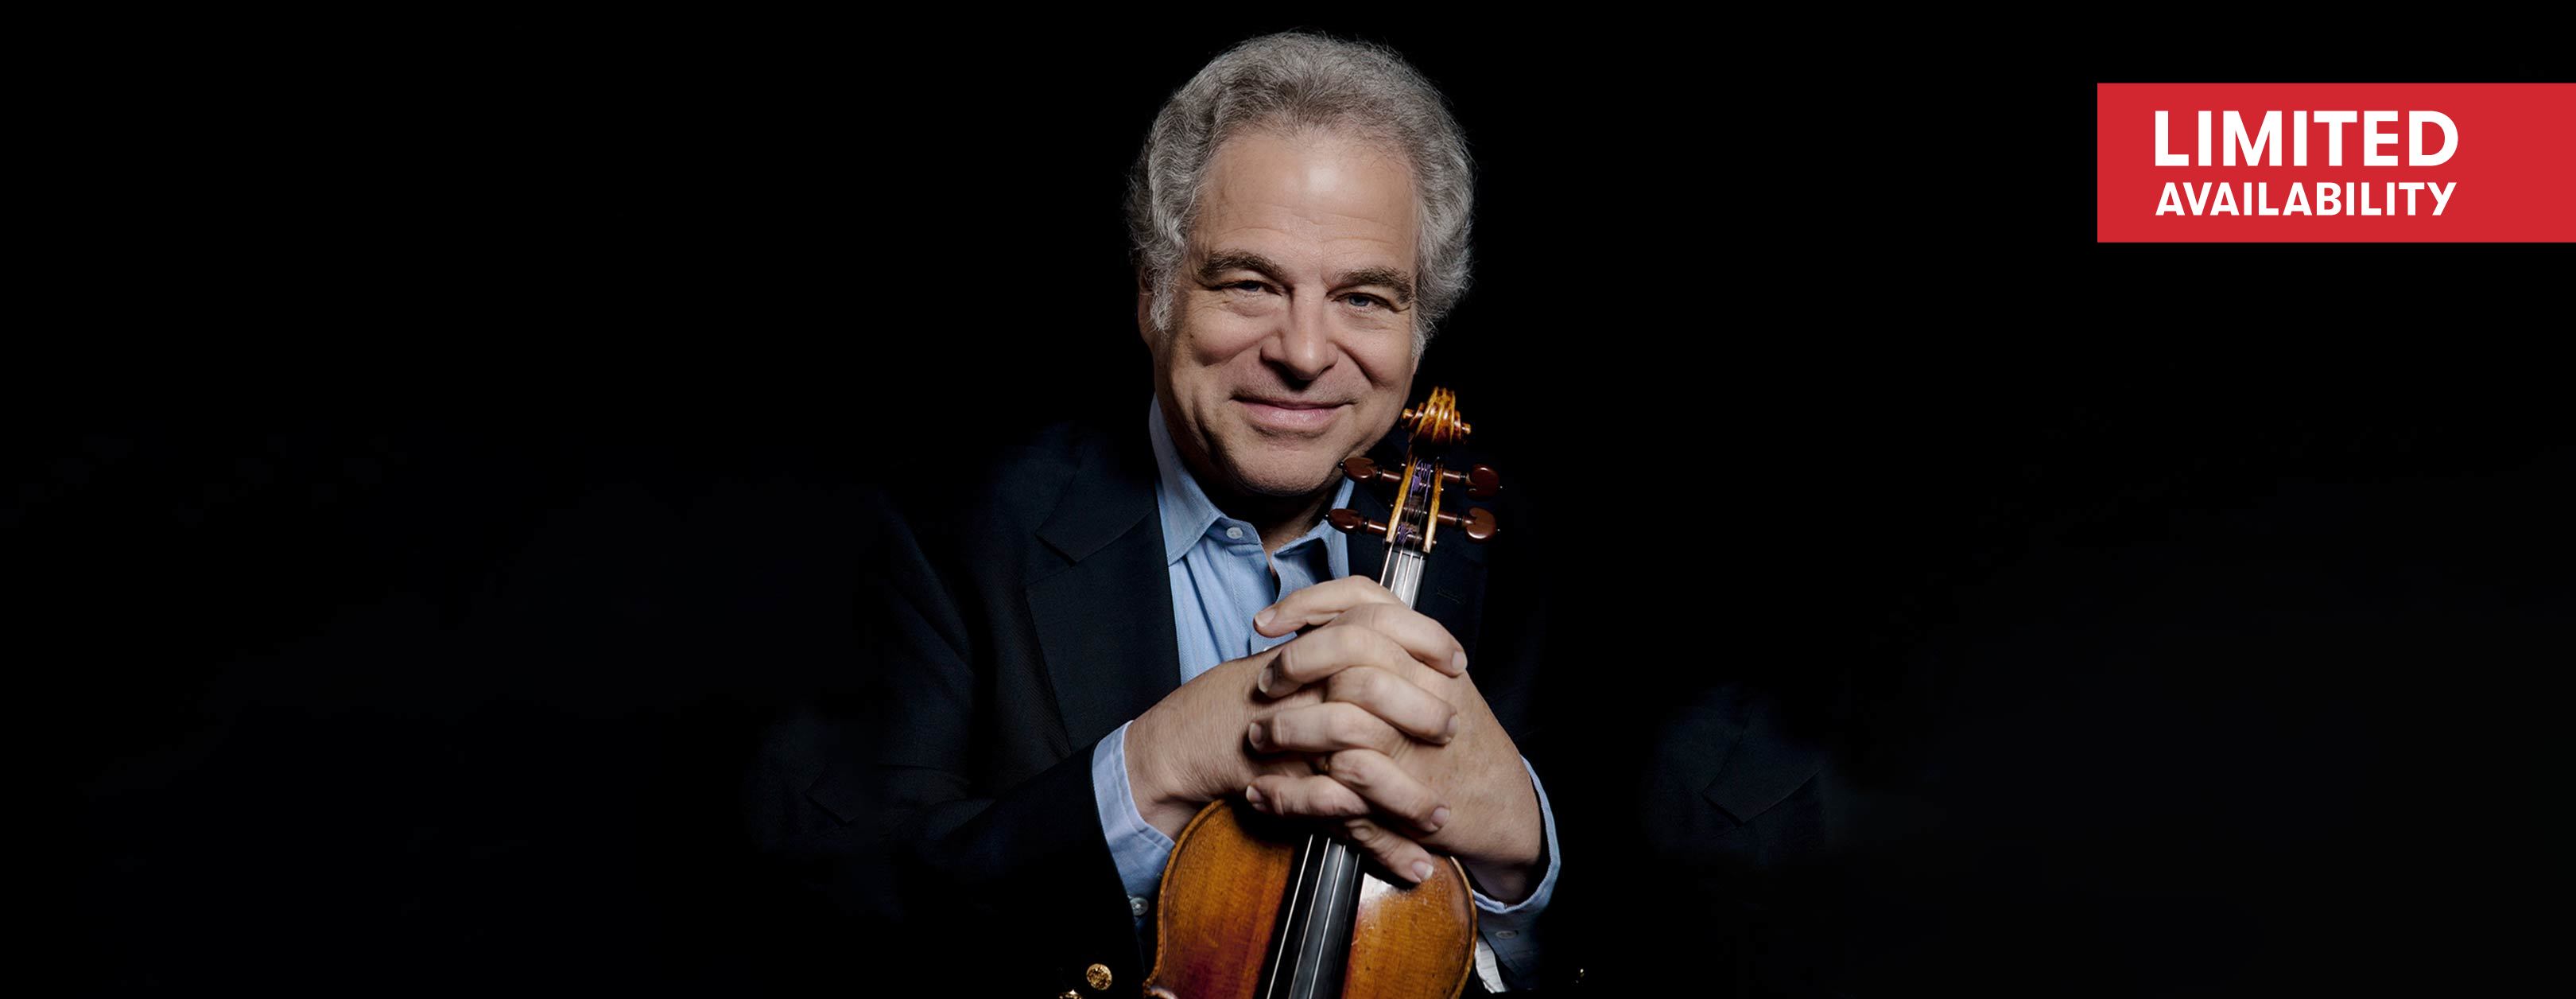 New York’s Orchestra Is Back: A Gala Evening with Itzhak Perlman